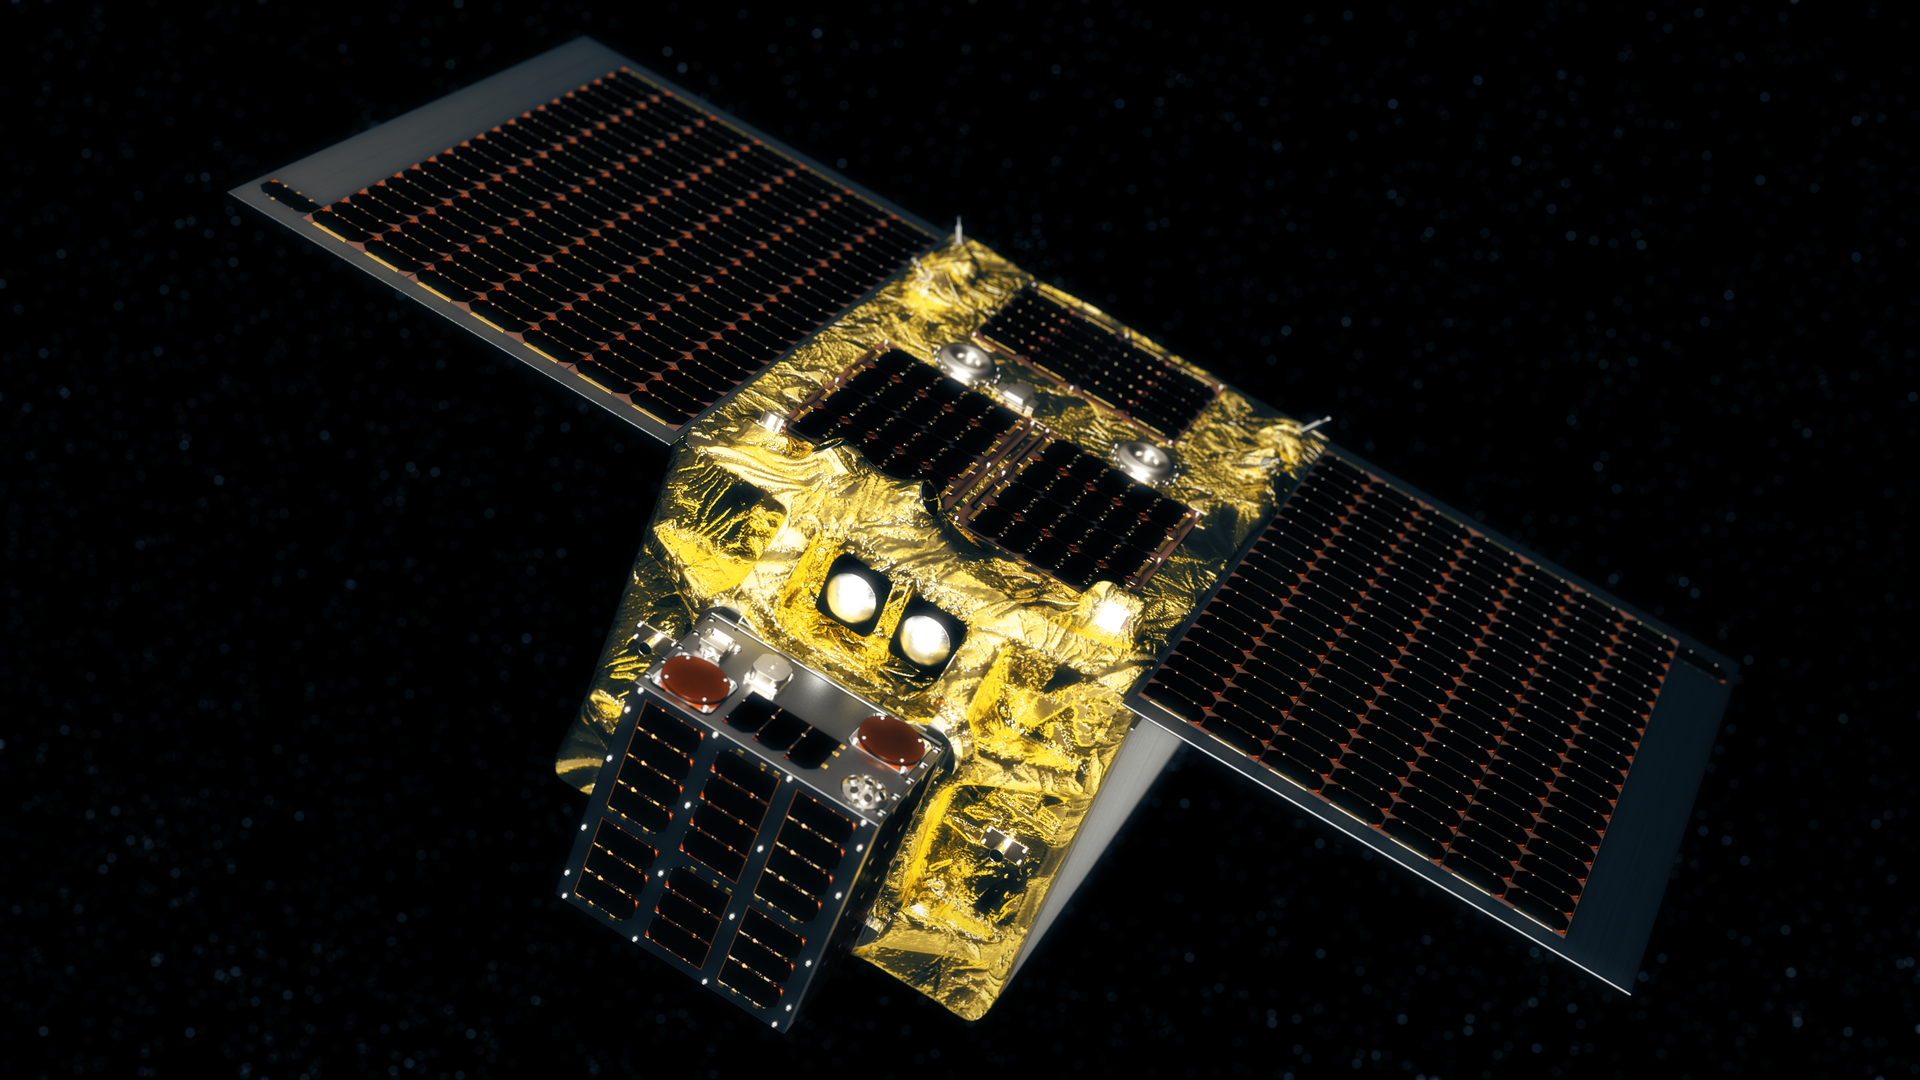 End-of-Life Service by Astroscale demonstrator (ELSA-d) satellite